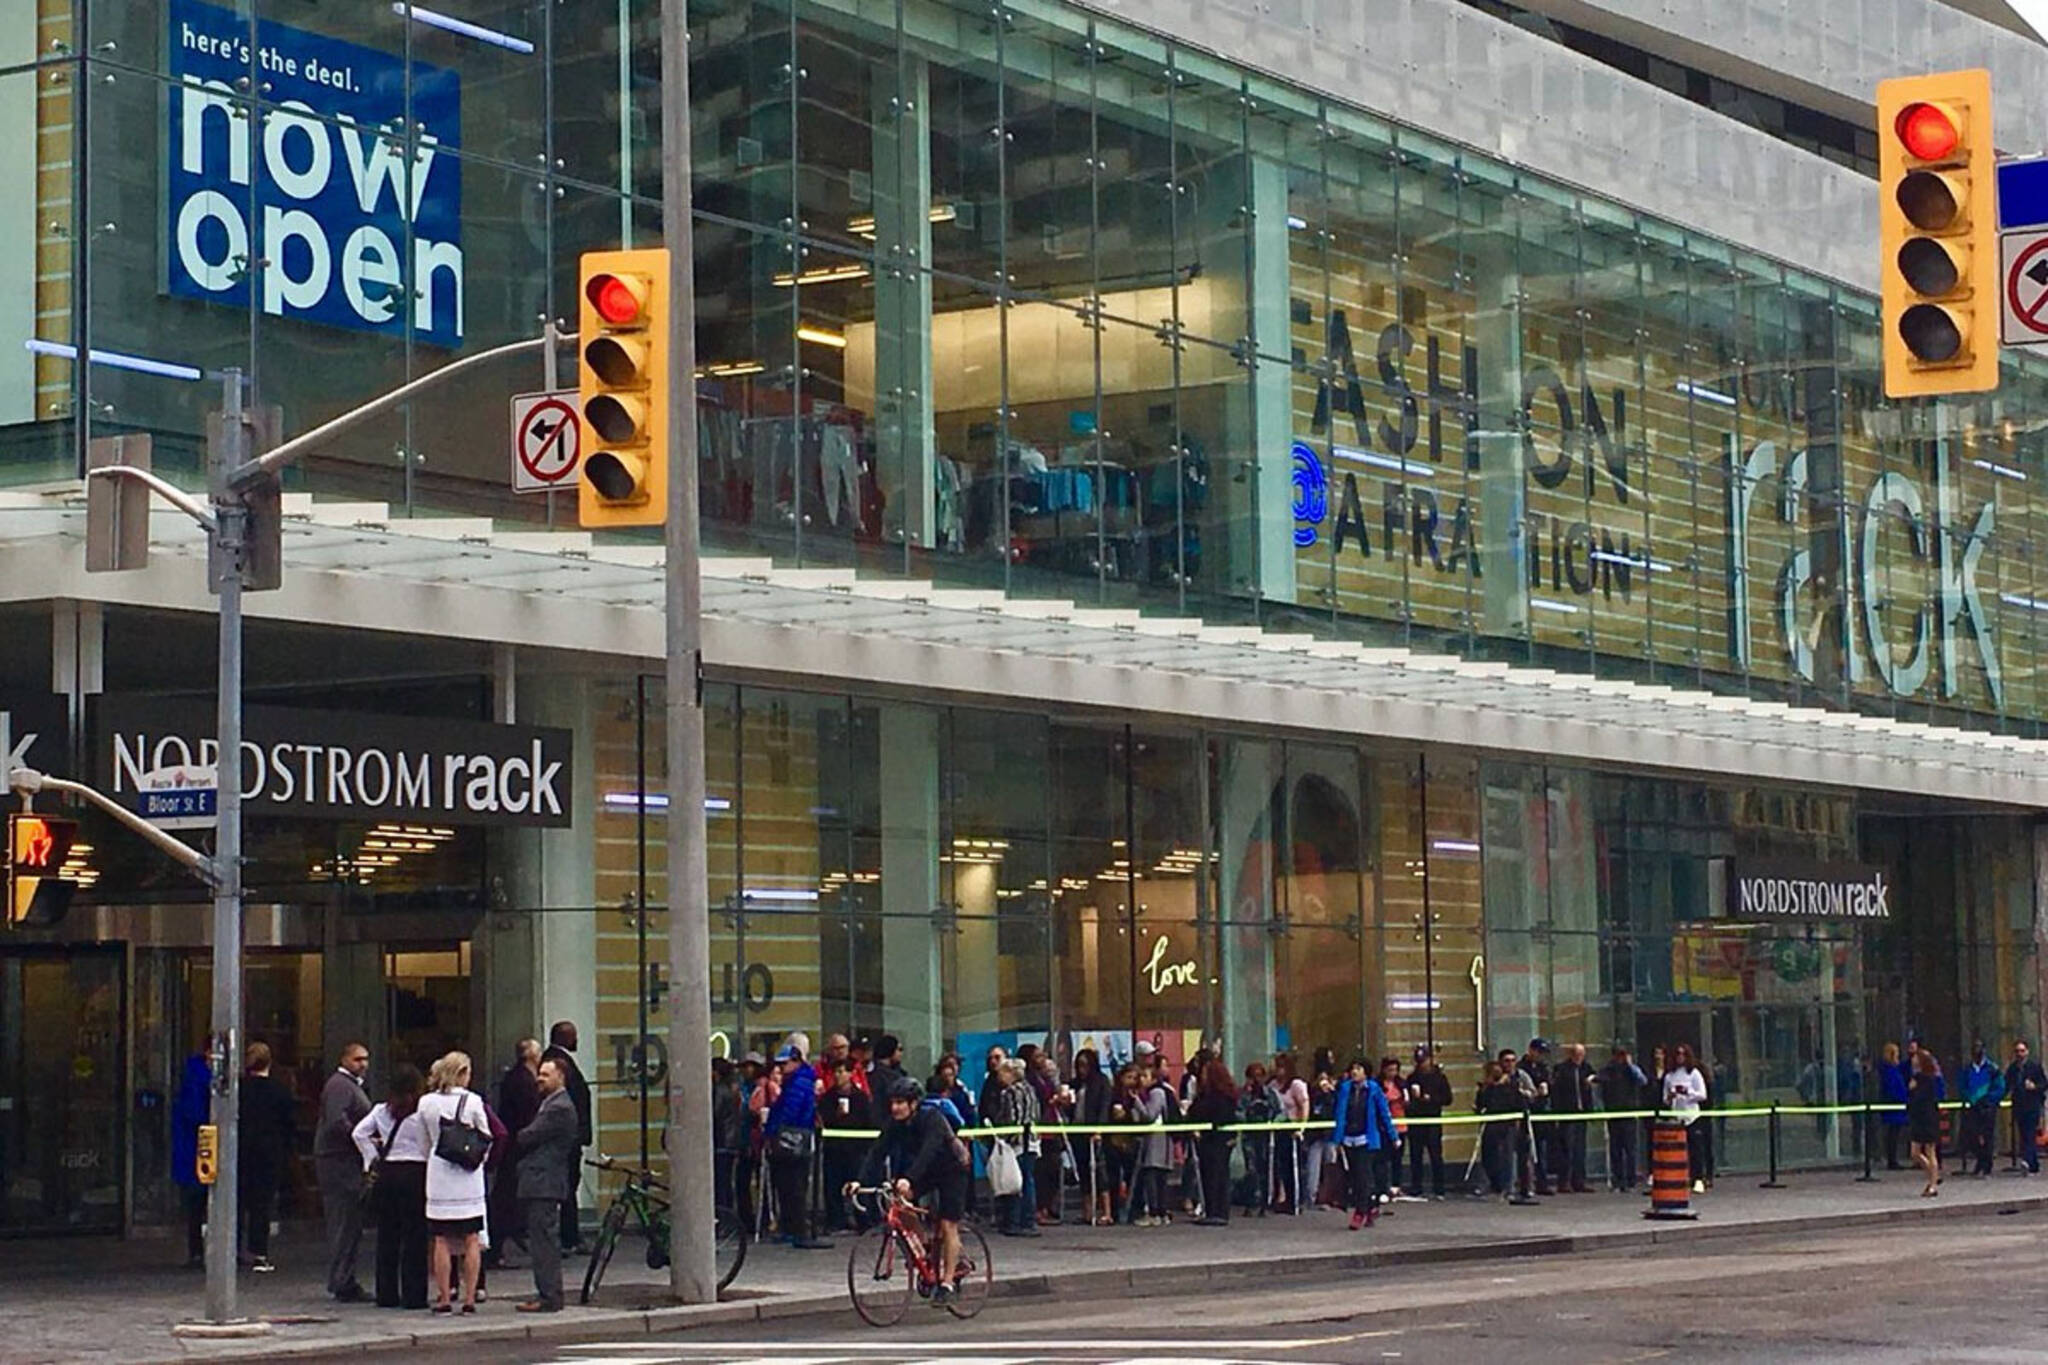 Massive crowds show up for Nordstrom Rack in downtown Toronto